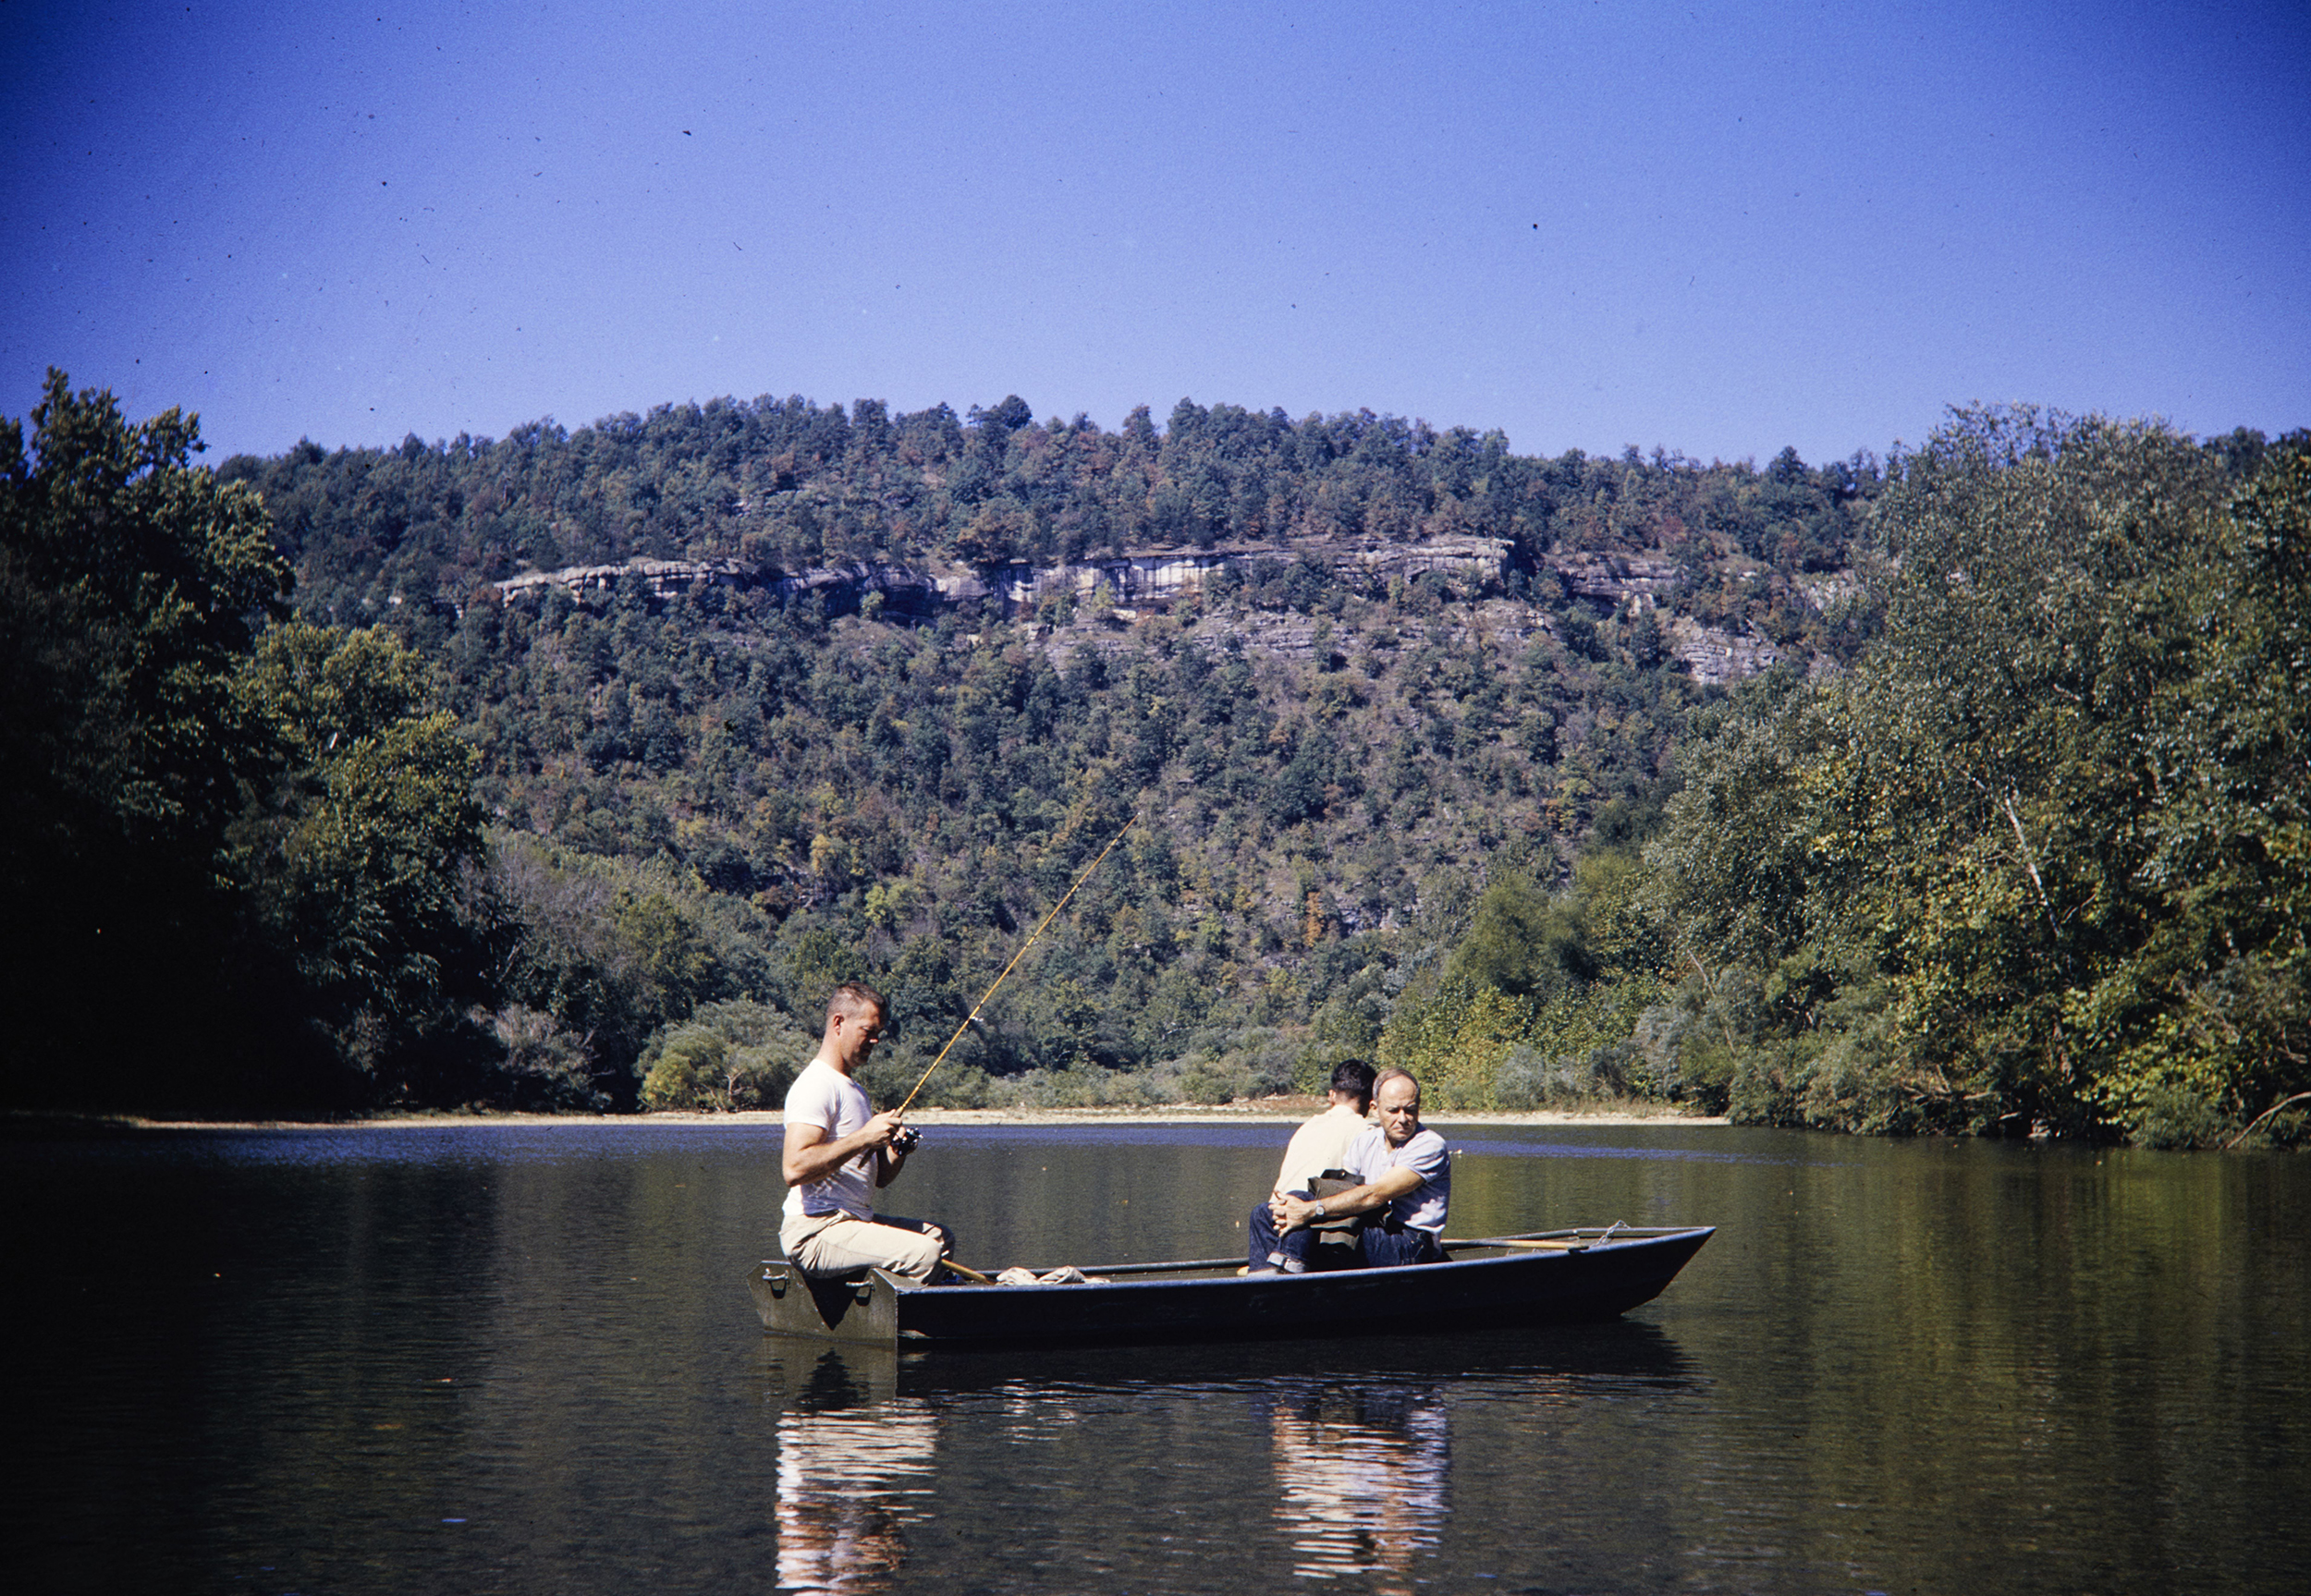 NPS personnel fishing the Buffalo National River.